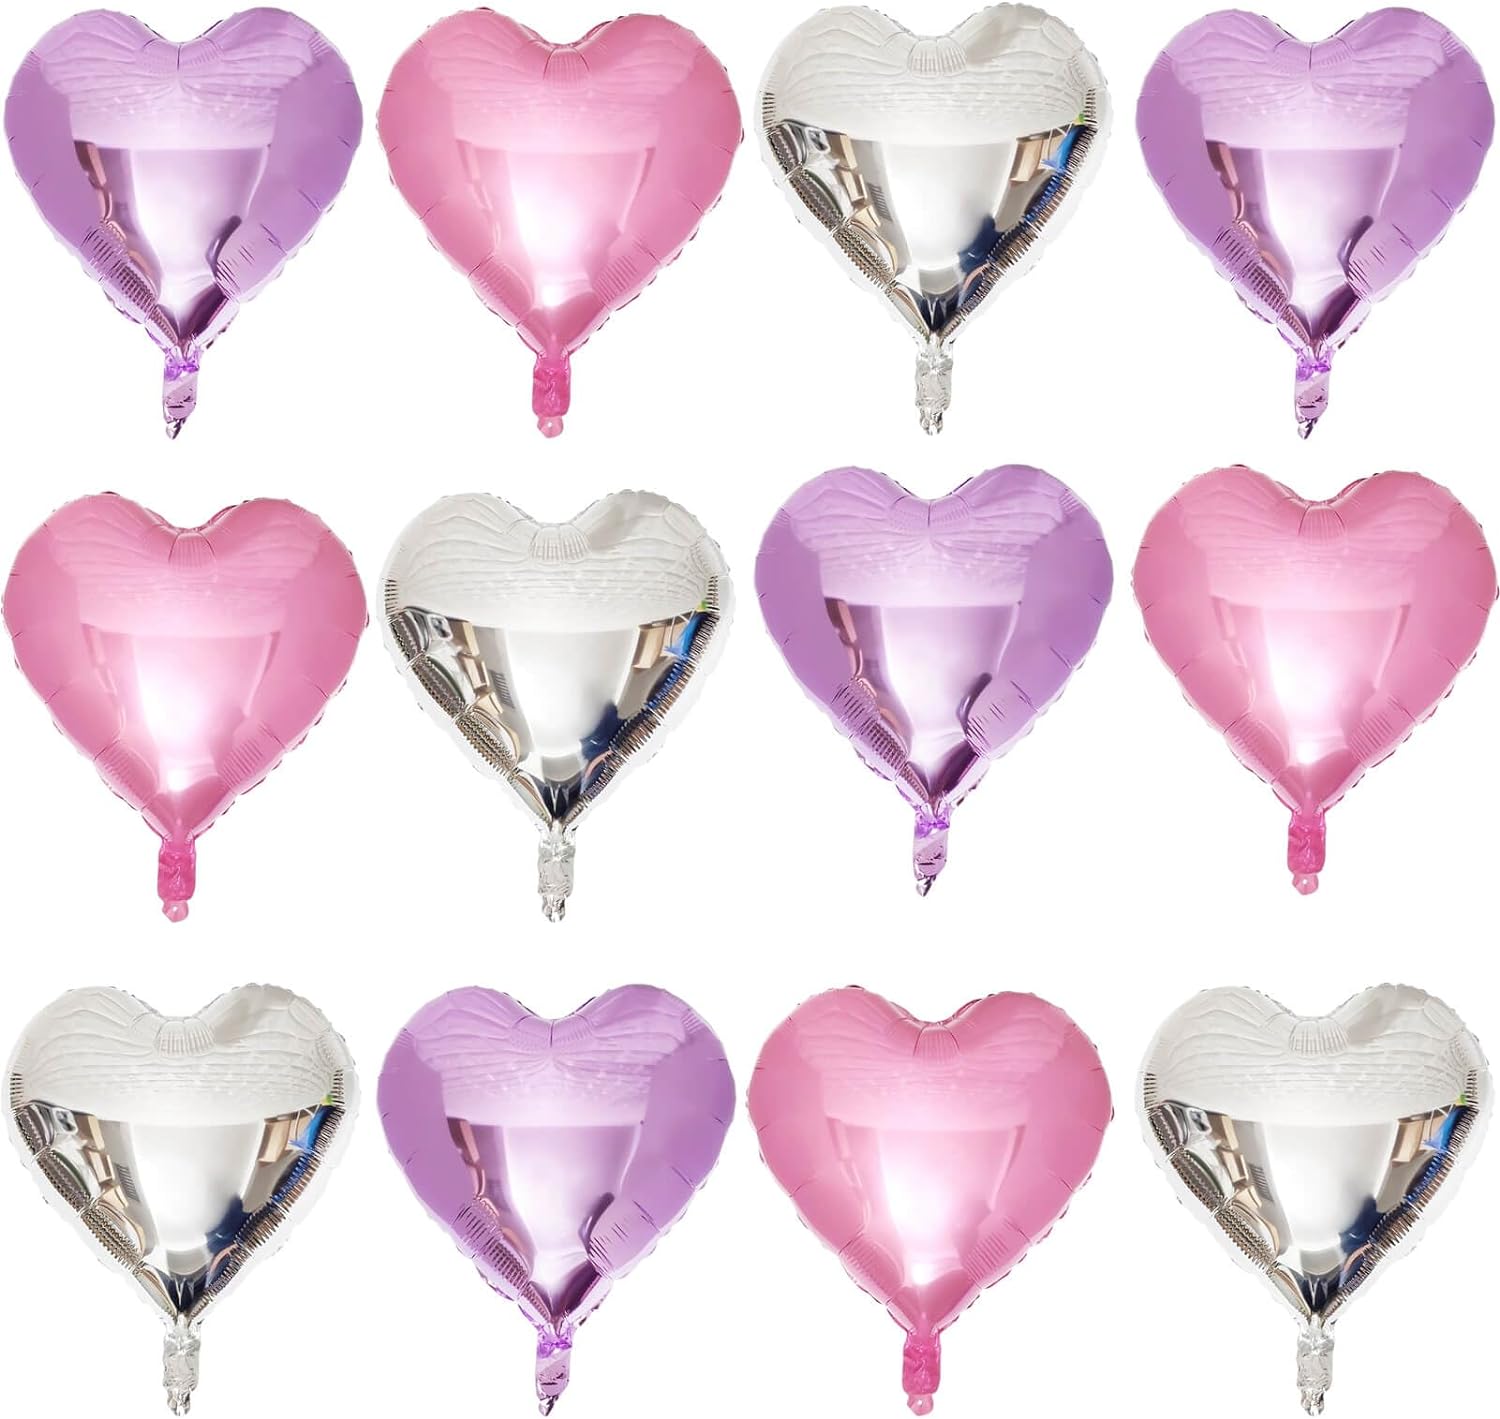 Heart Shaped Pack of 12, Silver Love Valentine 18" Balloons Heart Romantic Balloons (Pink, Purple, Silver)